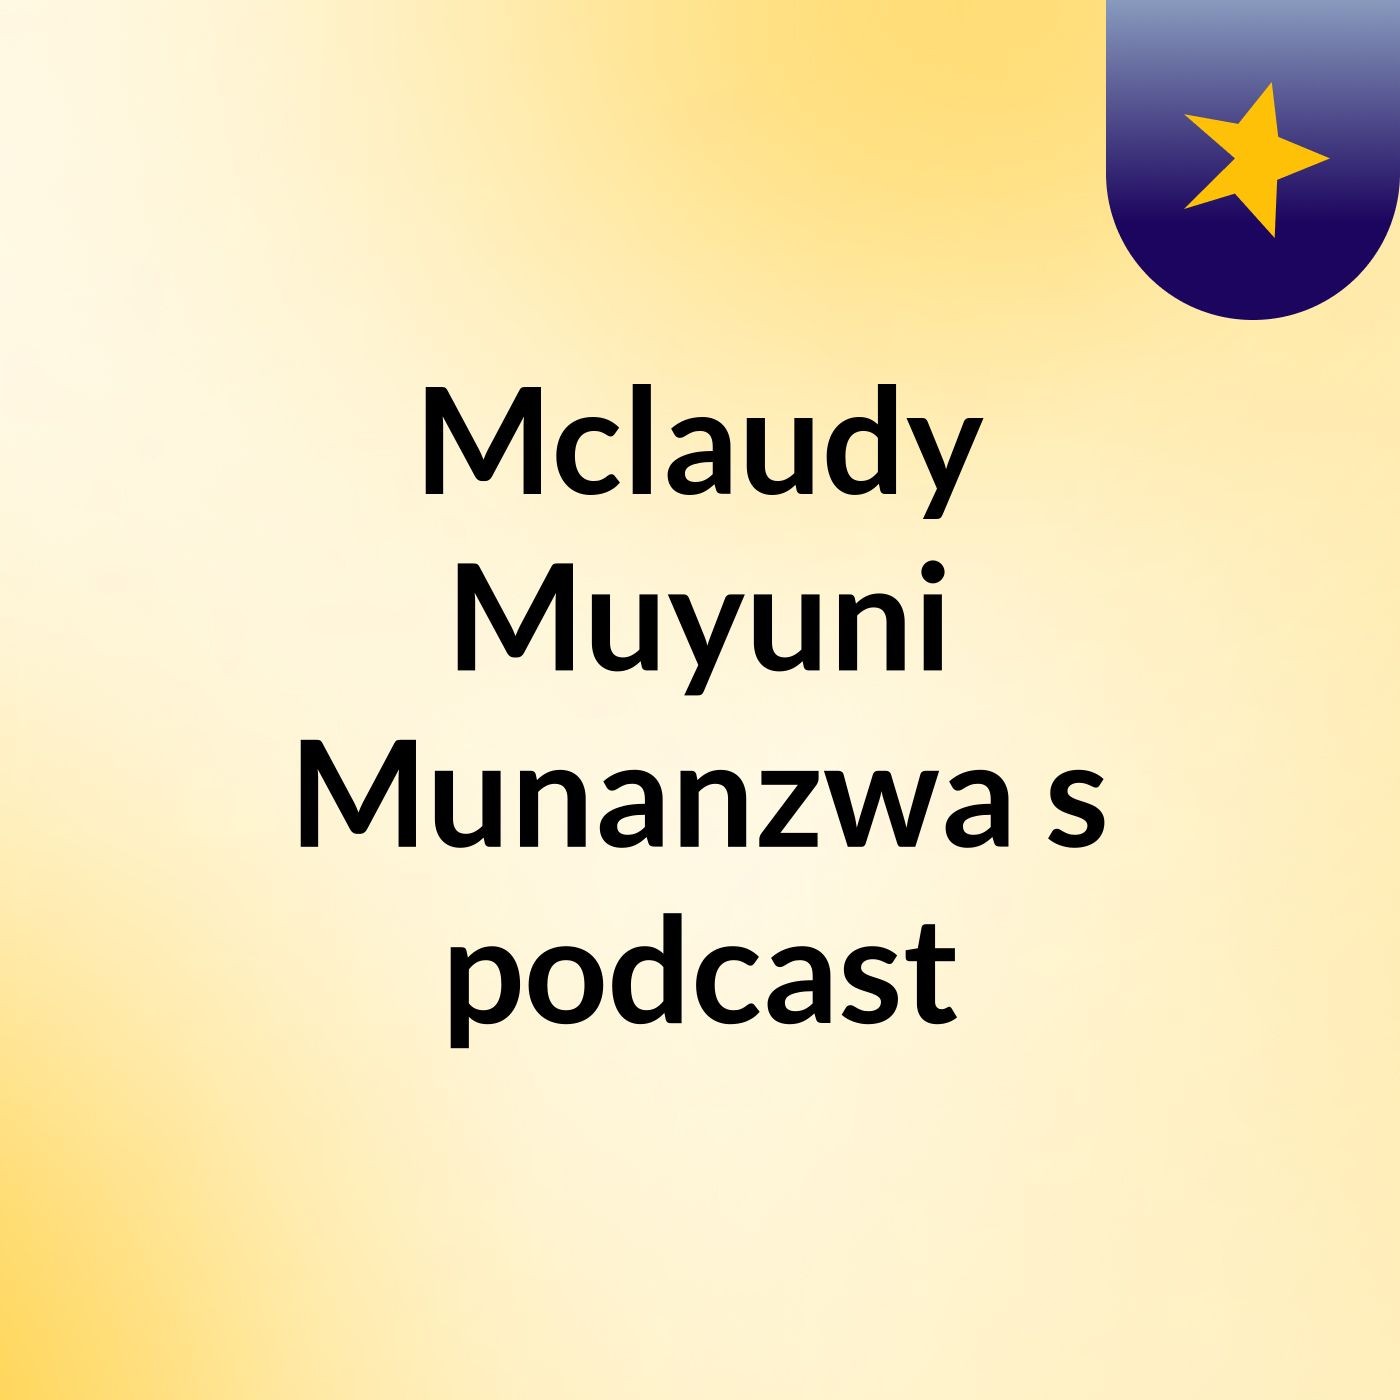 Enjoy The Podcast With Mclaudy